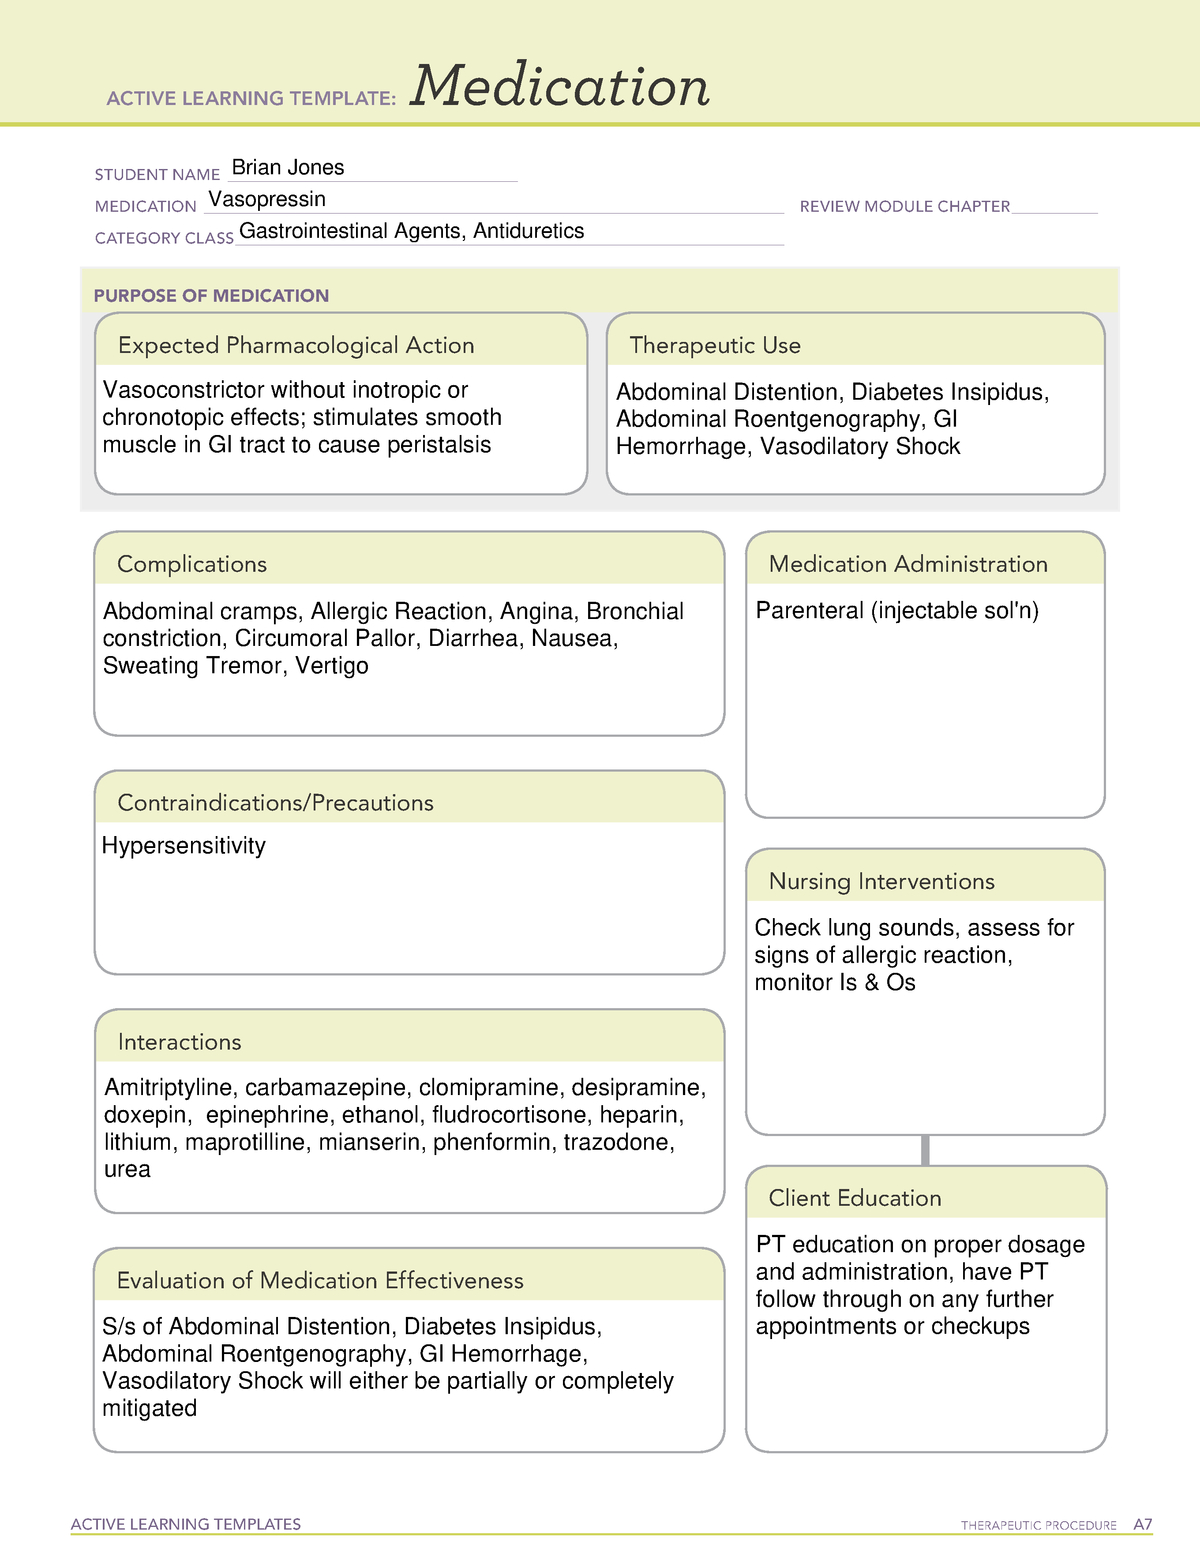 pharmacology-drug-card-template-free